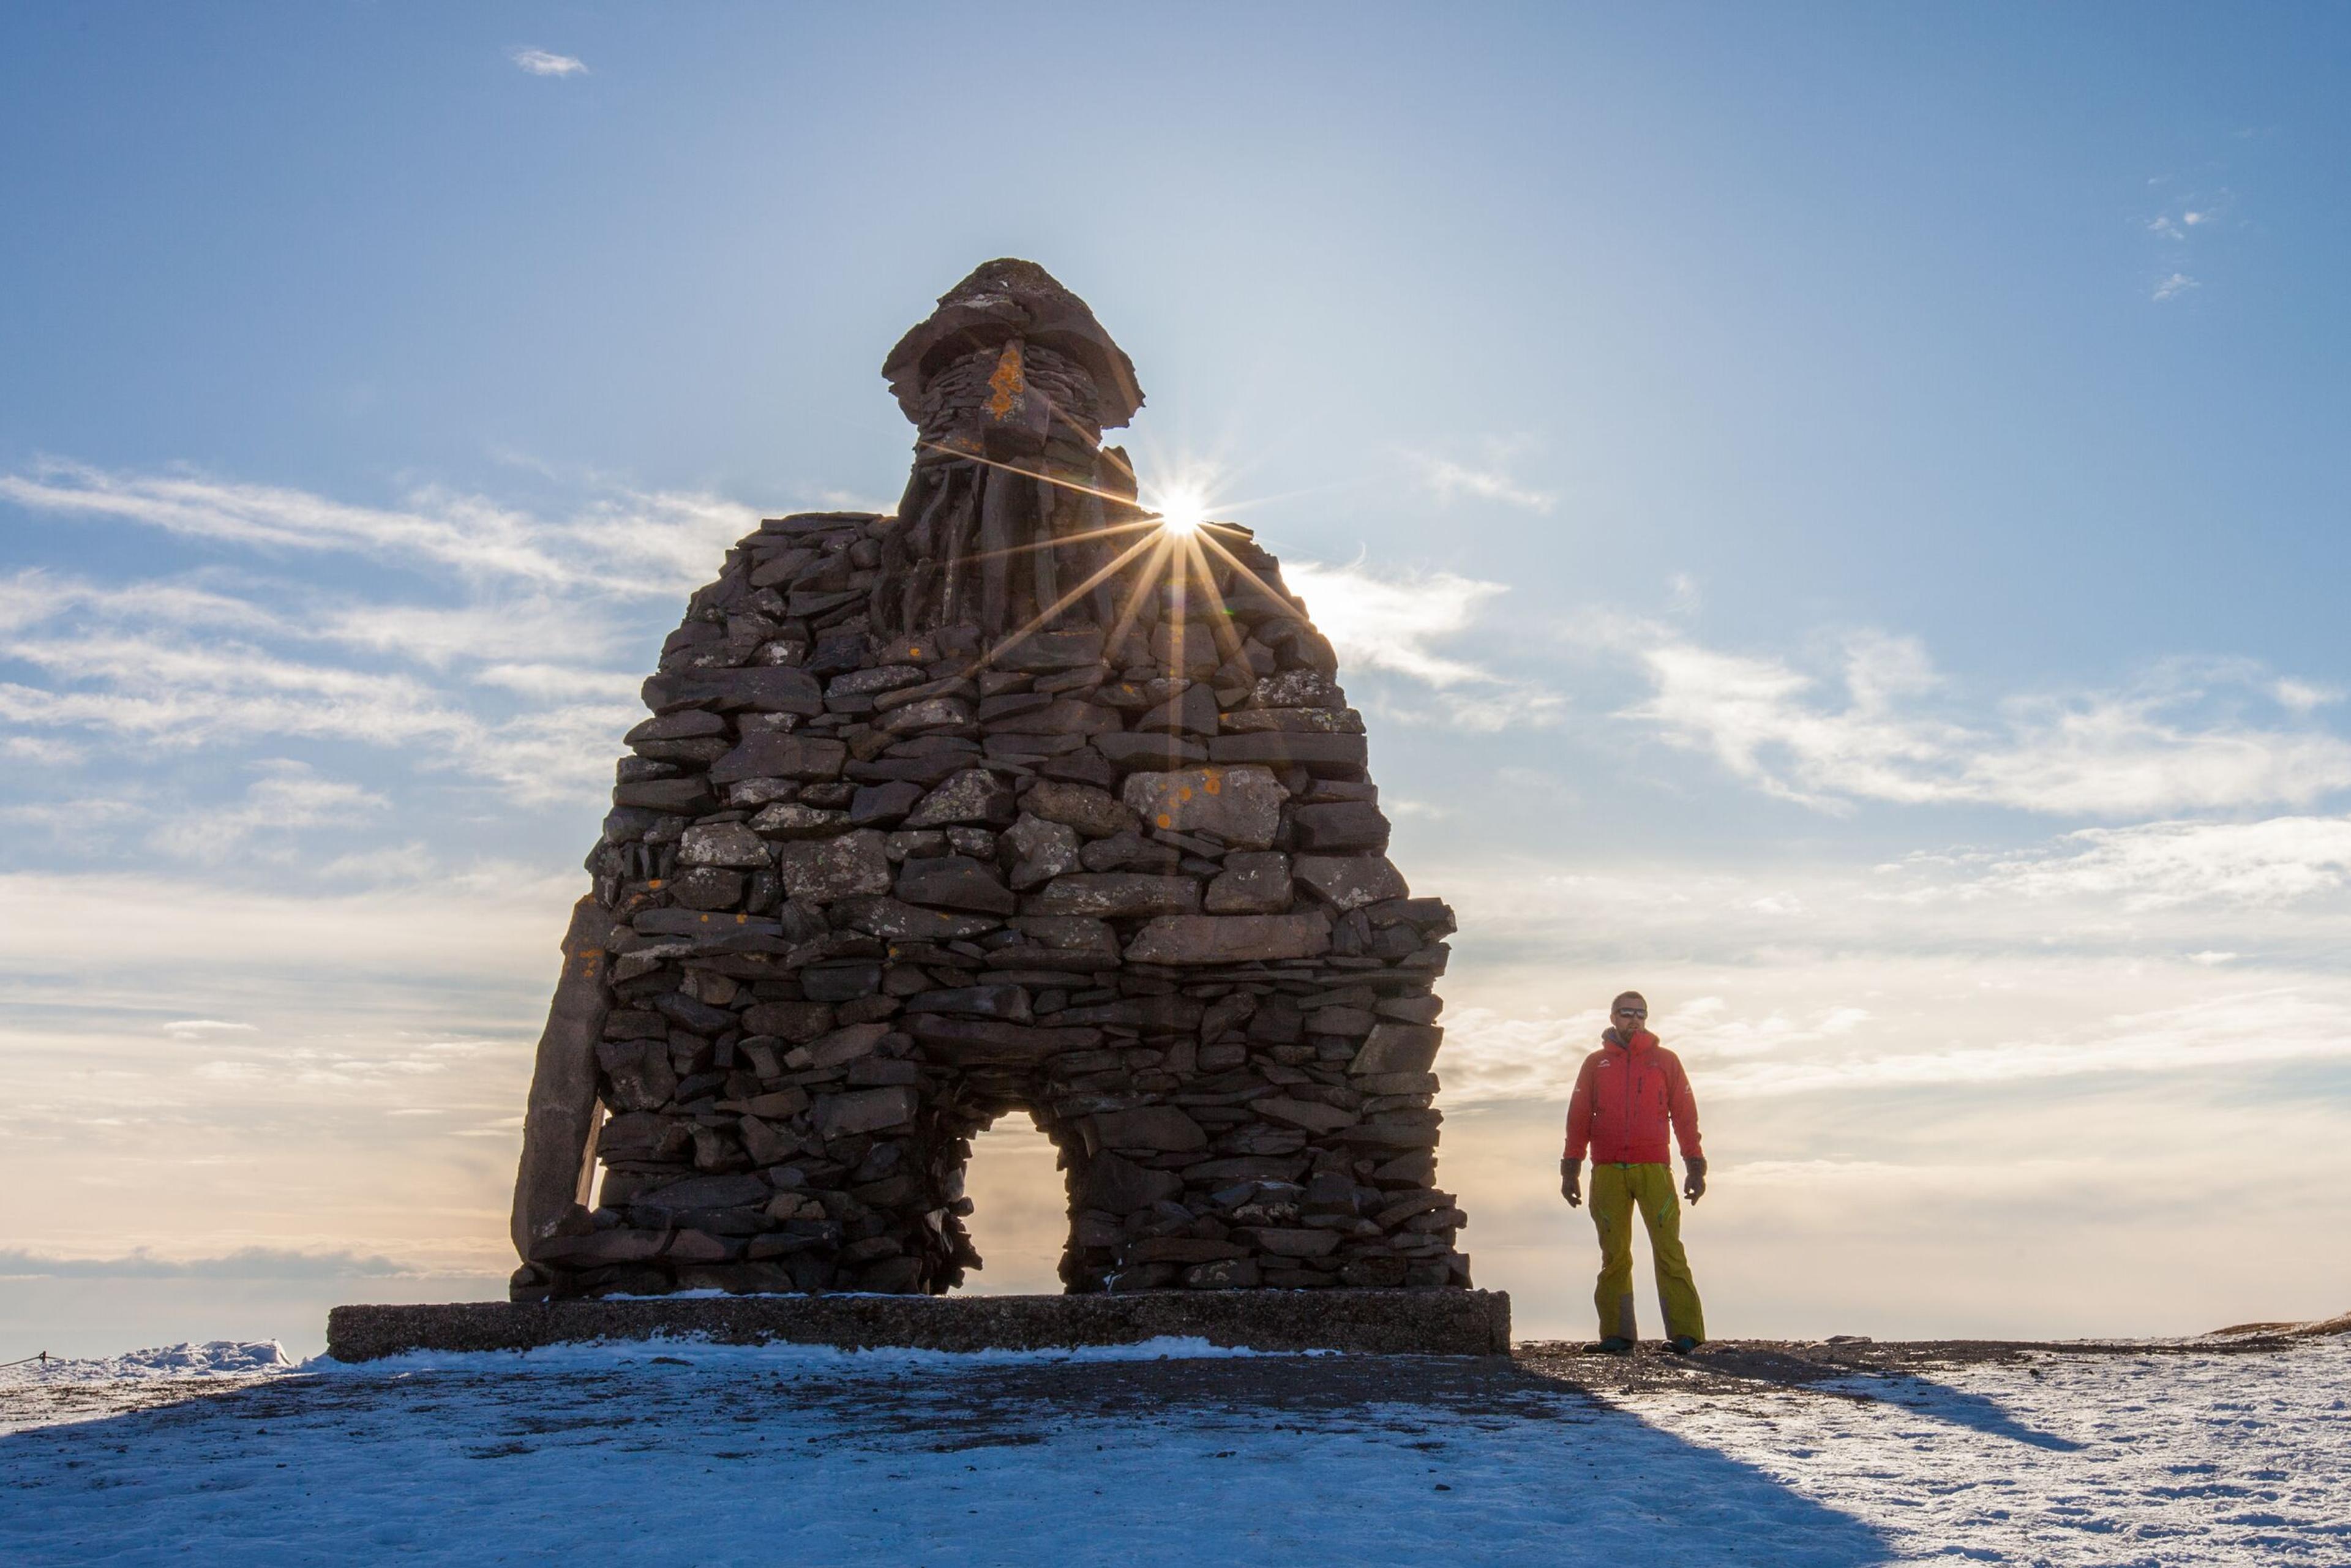 A large stone sculpture resembling a traditional Icelandic guardian figure stands on a snowy landscape, with the sun creating a starburst effect through its archway. A person in red stands nearby, adding scale to the scene.